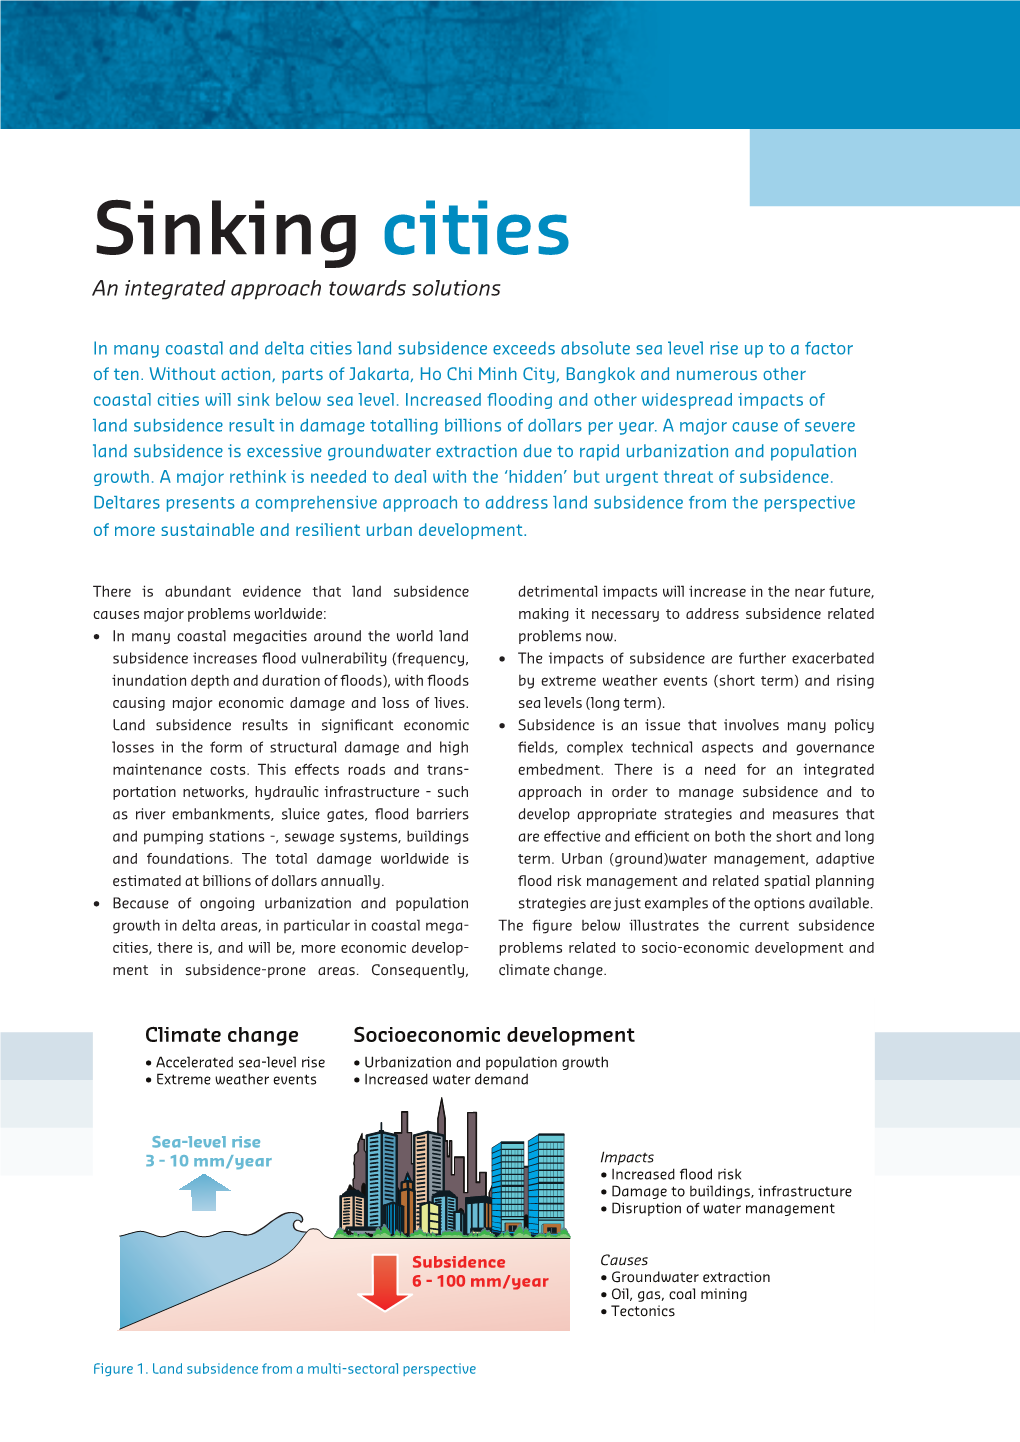 Sinking Cities an Integrated Approach Towards Solutions